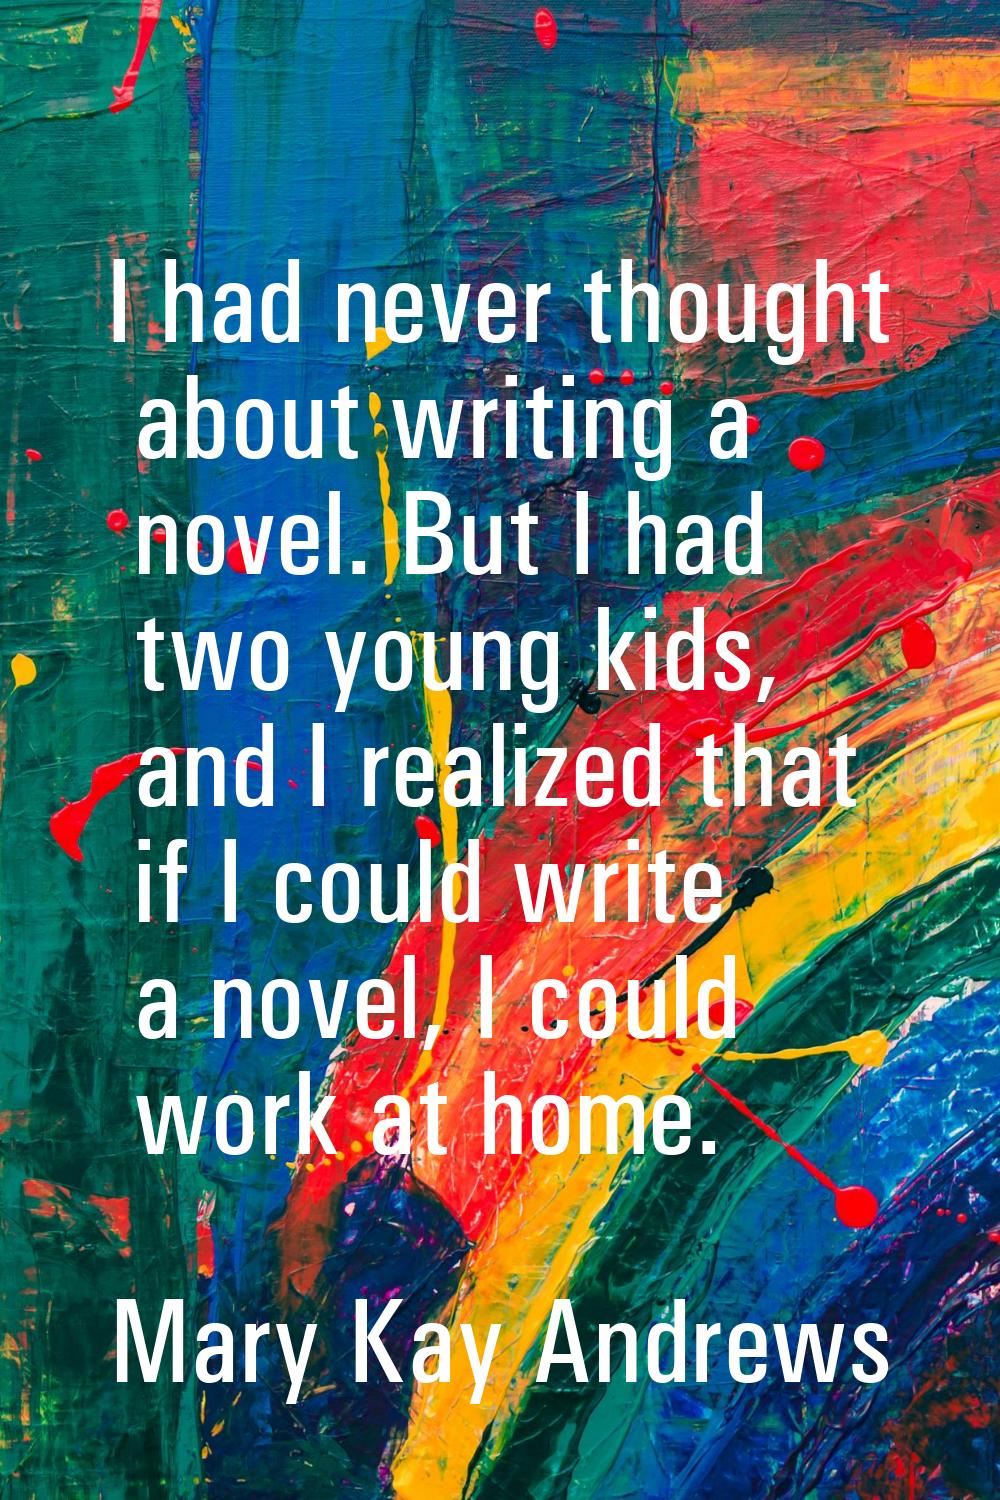 I had never thought about writing a novel. But I had two young kids, and I realized that if I could